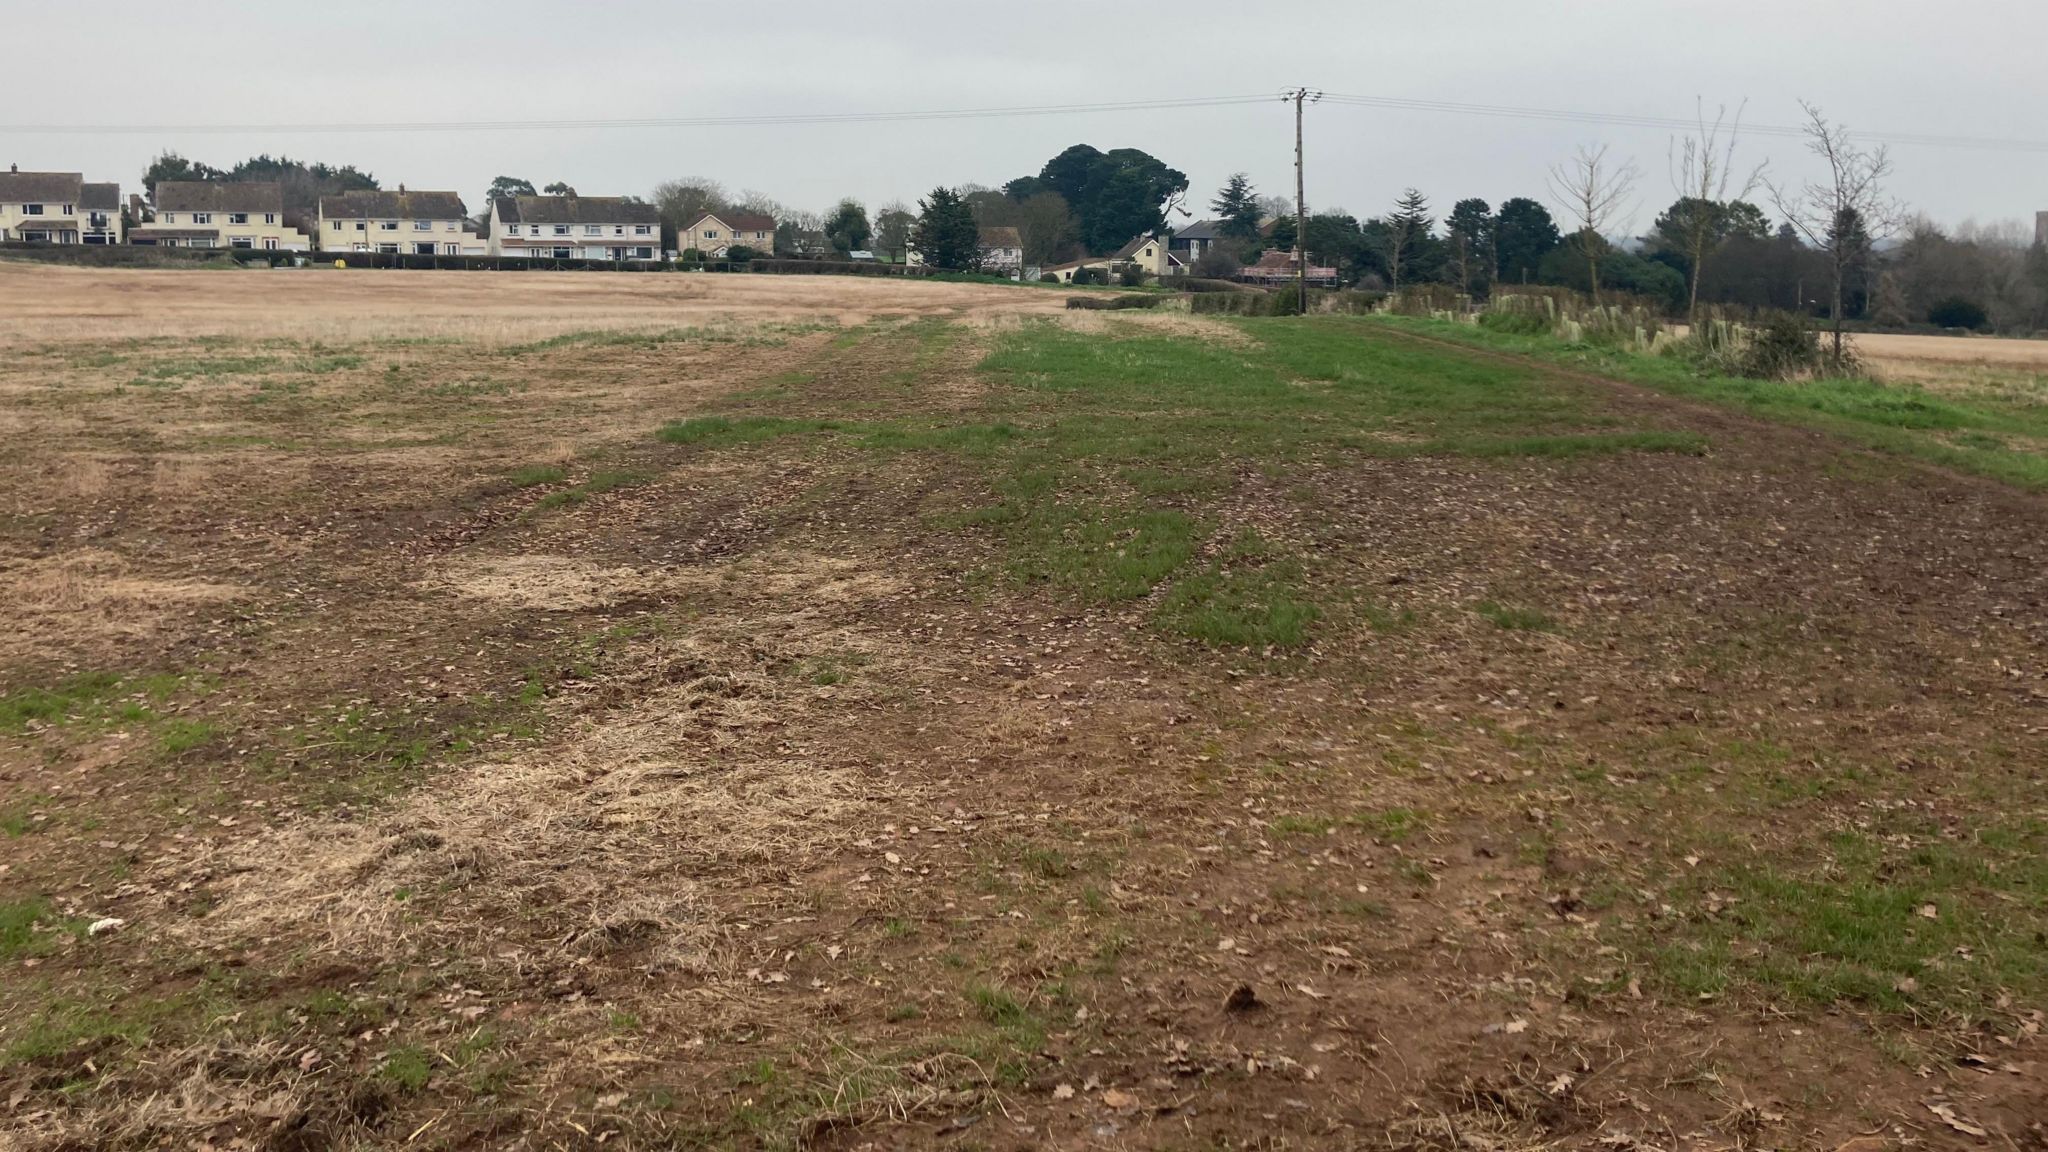 The proposed site in Cannington